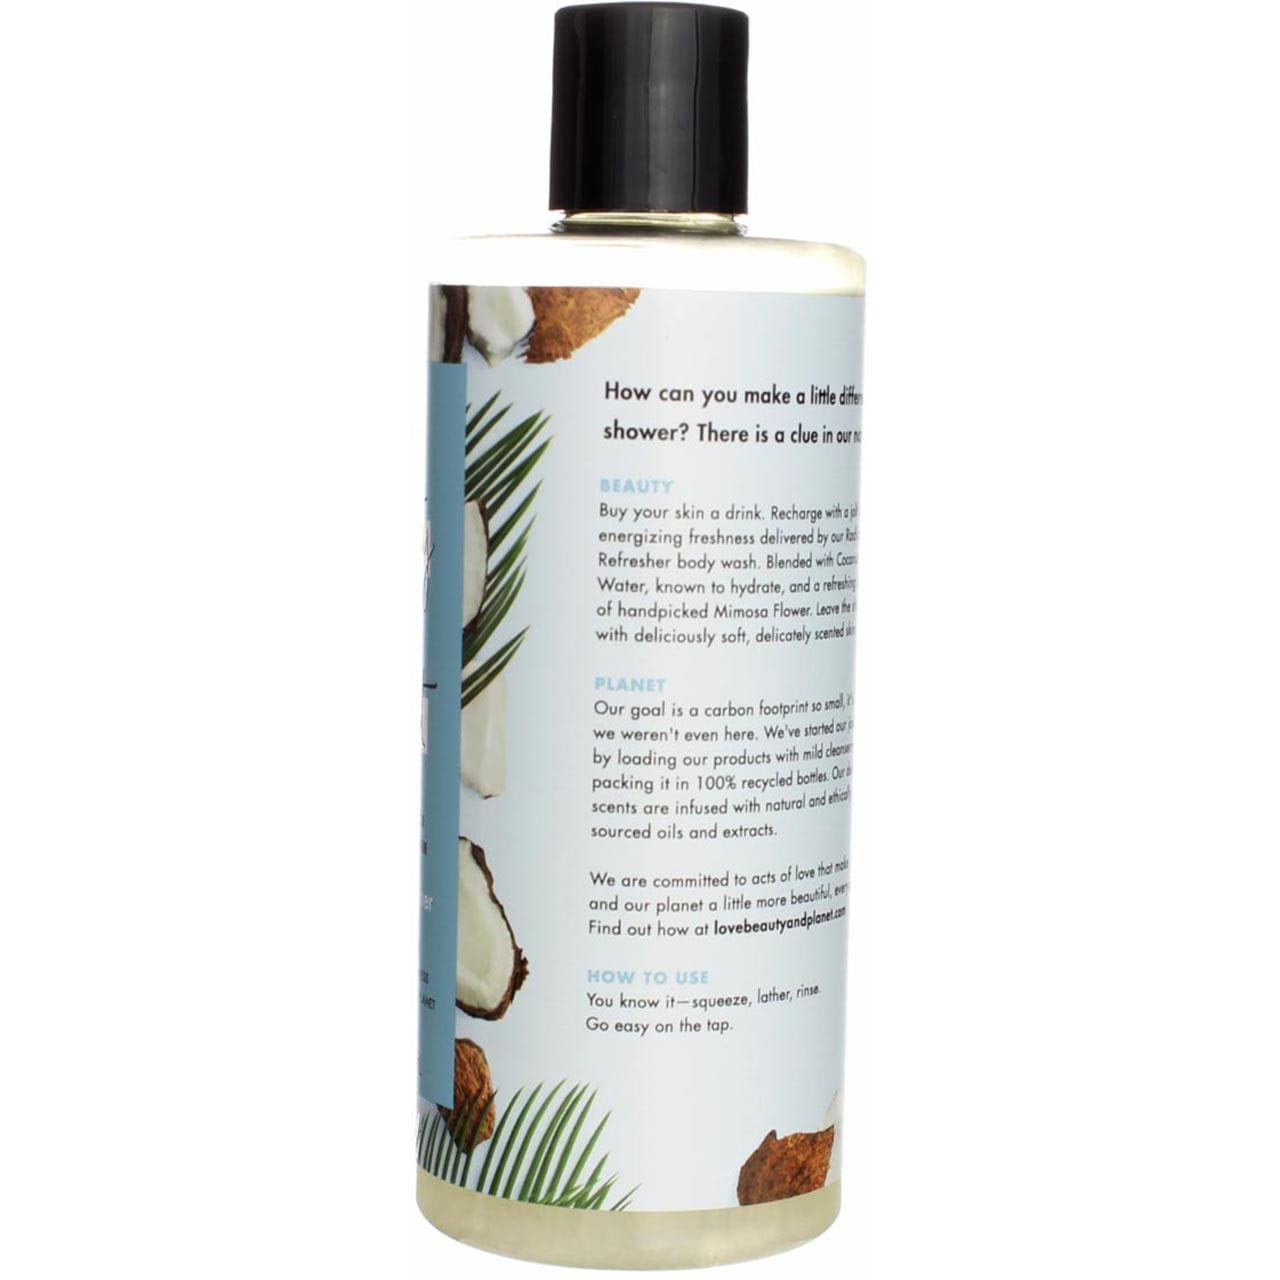 Love Beauty And Planet Radical Refresher Body Wash for Energizing Freshness Coconut Water & Mimosa Flower Hydrating Bodywash 16 oz